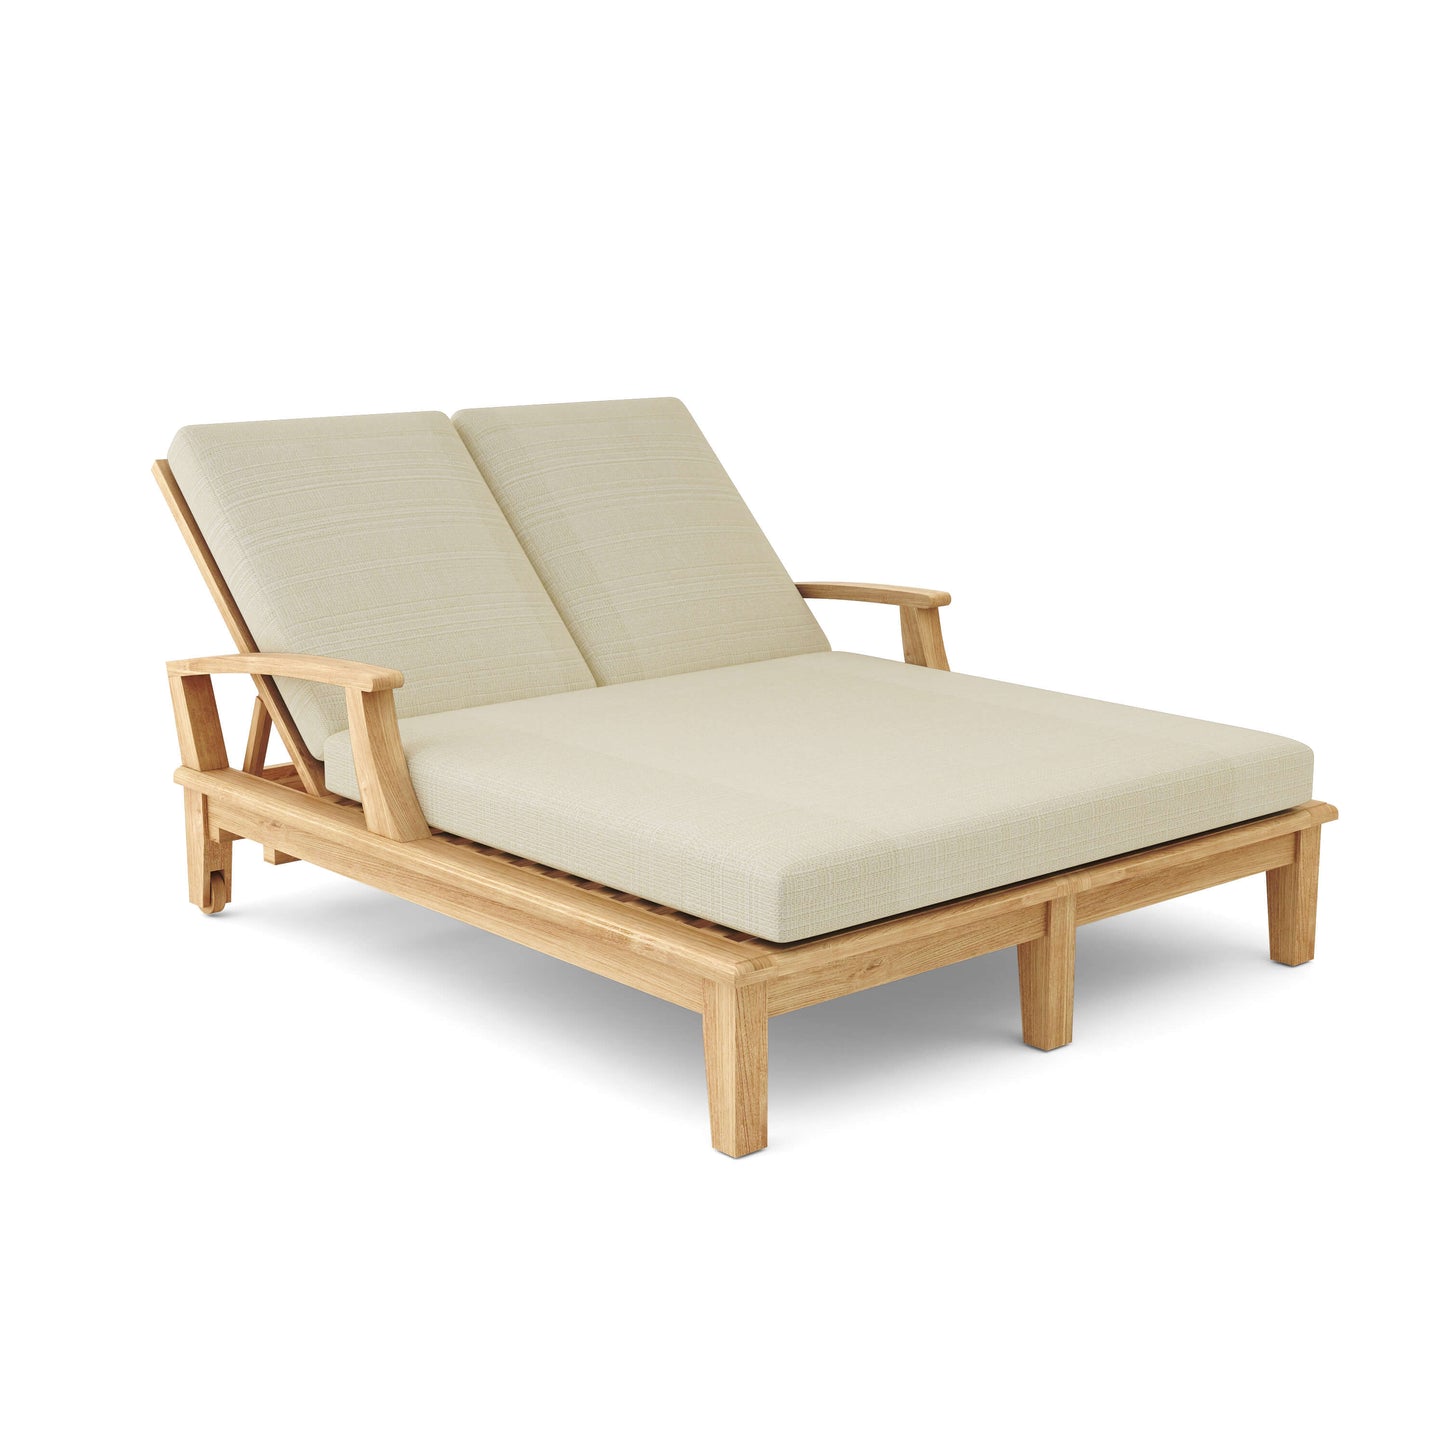 Brianna Double Sun Lounger with Arm - Addison Foster